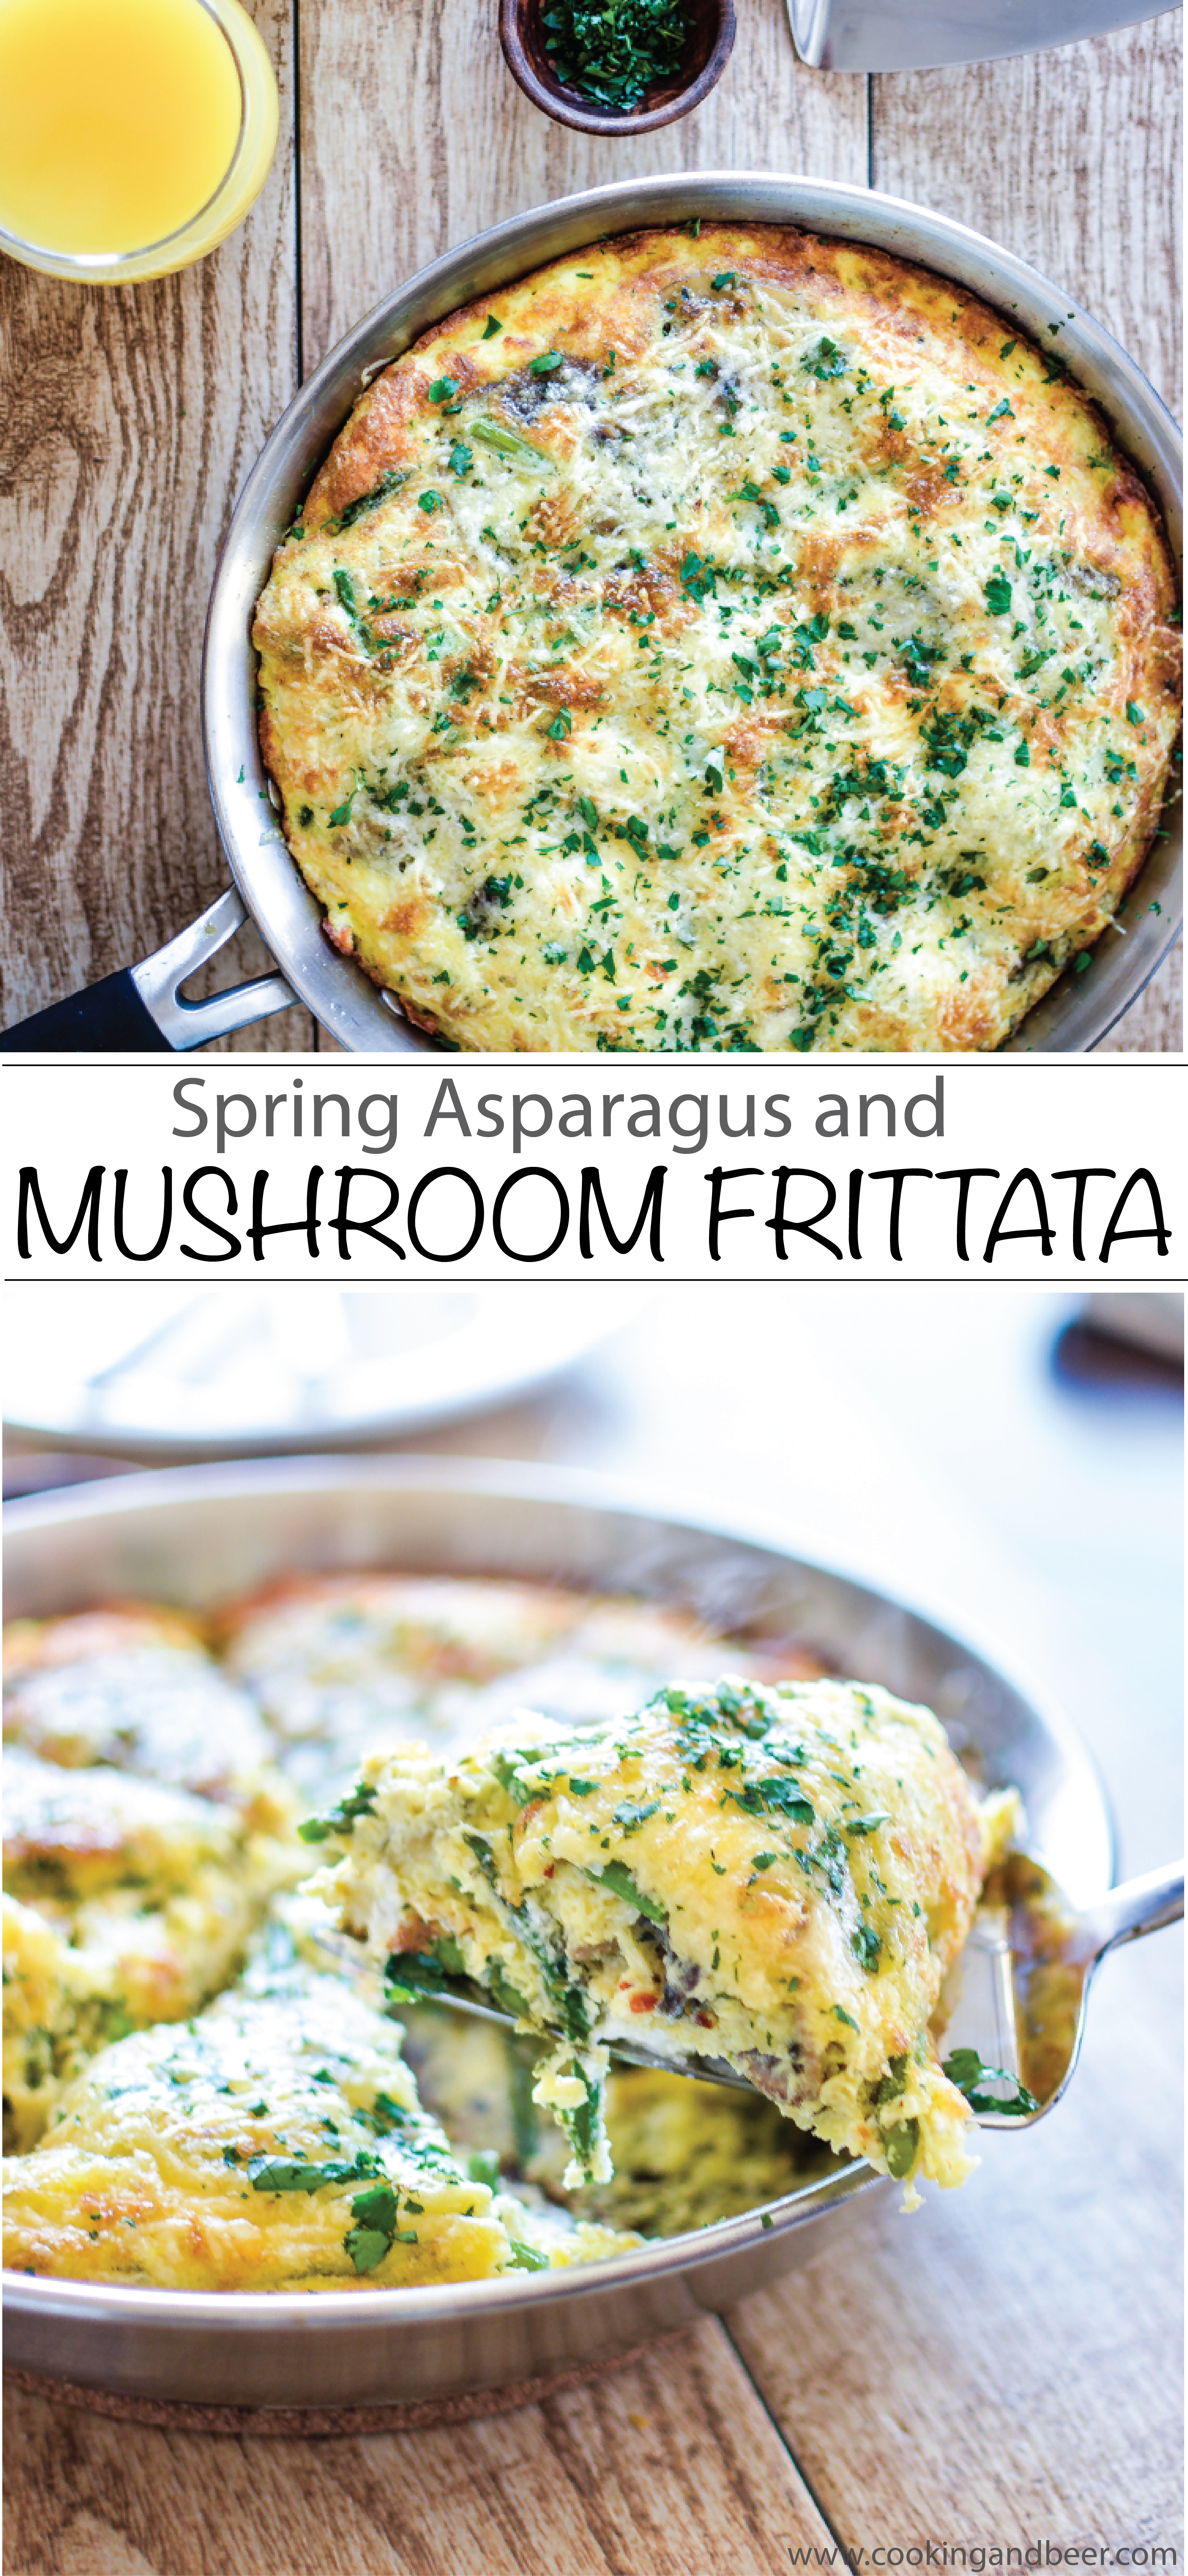 Spring Asparagus and Mushroom Frittata Recipe: a must-have for this year's Easter brunch menu! | www.cookingandbeer.com